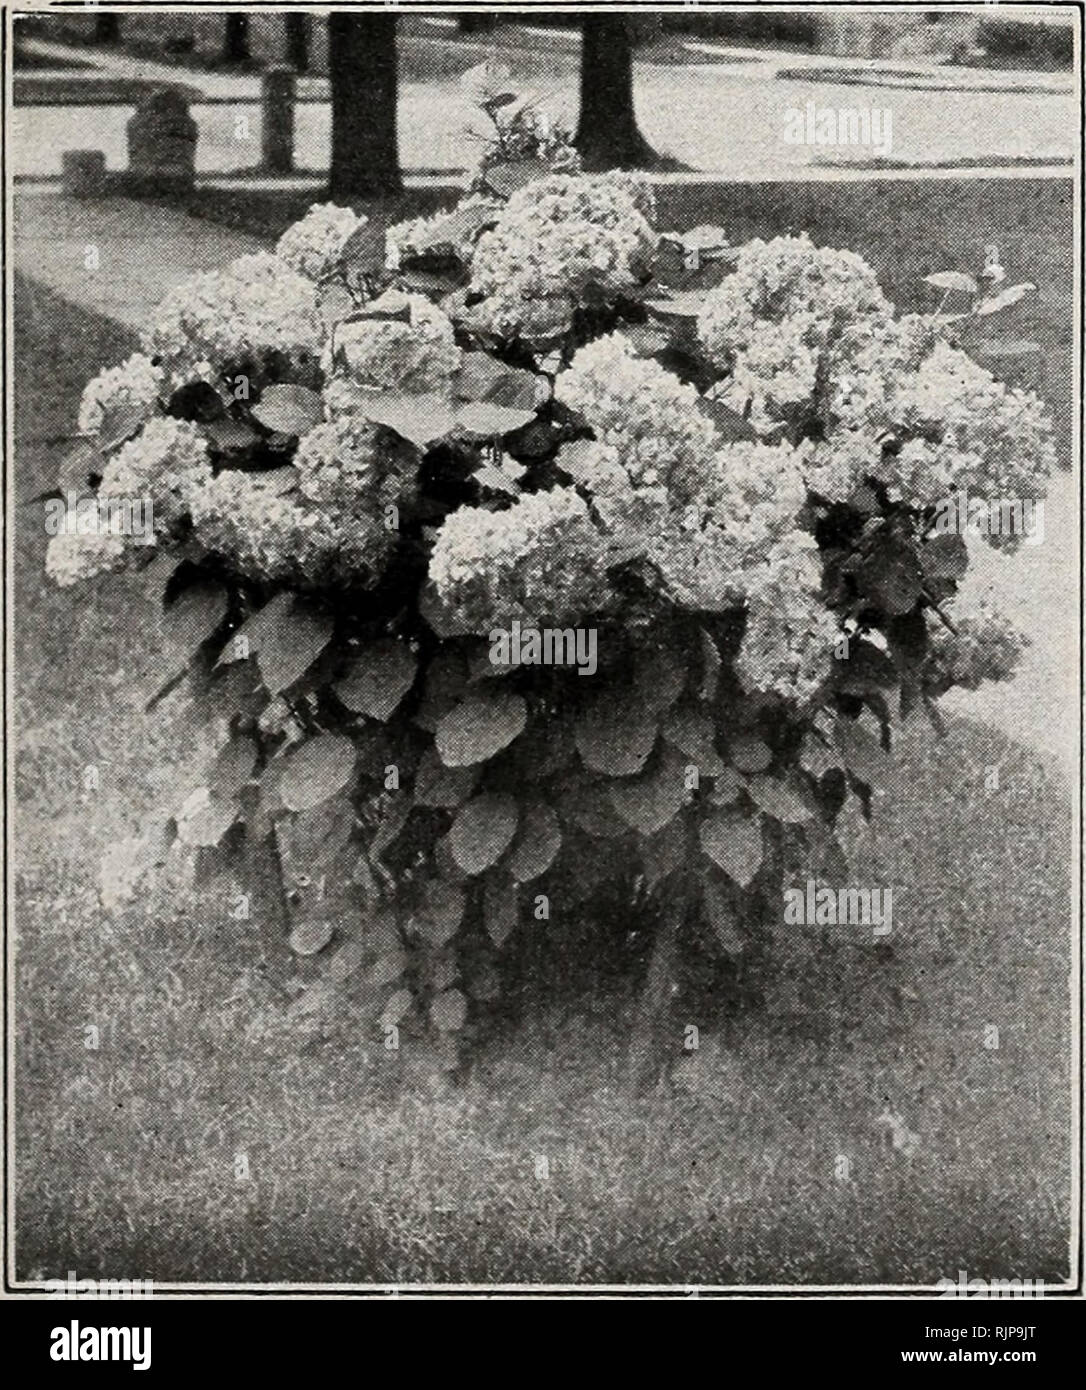 . Autumn edition 1925 : our new guide to rose culture. . Double. Bright red. Deep rose. Double, mid- New Everblooming Hydrangea Dingee Peony Edulis Superba. Double. Early. Beautiful brilliant pink. Faust. Delicate light pink: double, late. Felix Crousse. Brilliant red. Extra fine. Double, midseason. Festiva Maxima. White center, flaked red. Double, early. Festiva Alba. Cream-white, red spots. Double, late. Francois Ortegat. Deep crimson. Double. Humei. Cherry pink. Highly cinnamon scented. H u mei Carnea. Clear flesh tinged rose. Insignis. Carmine rose. Very fragrant. Jeanne D'Arc. Pure white. Stock Photo